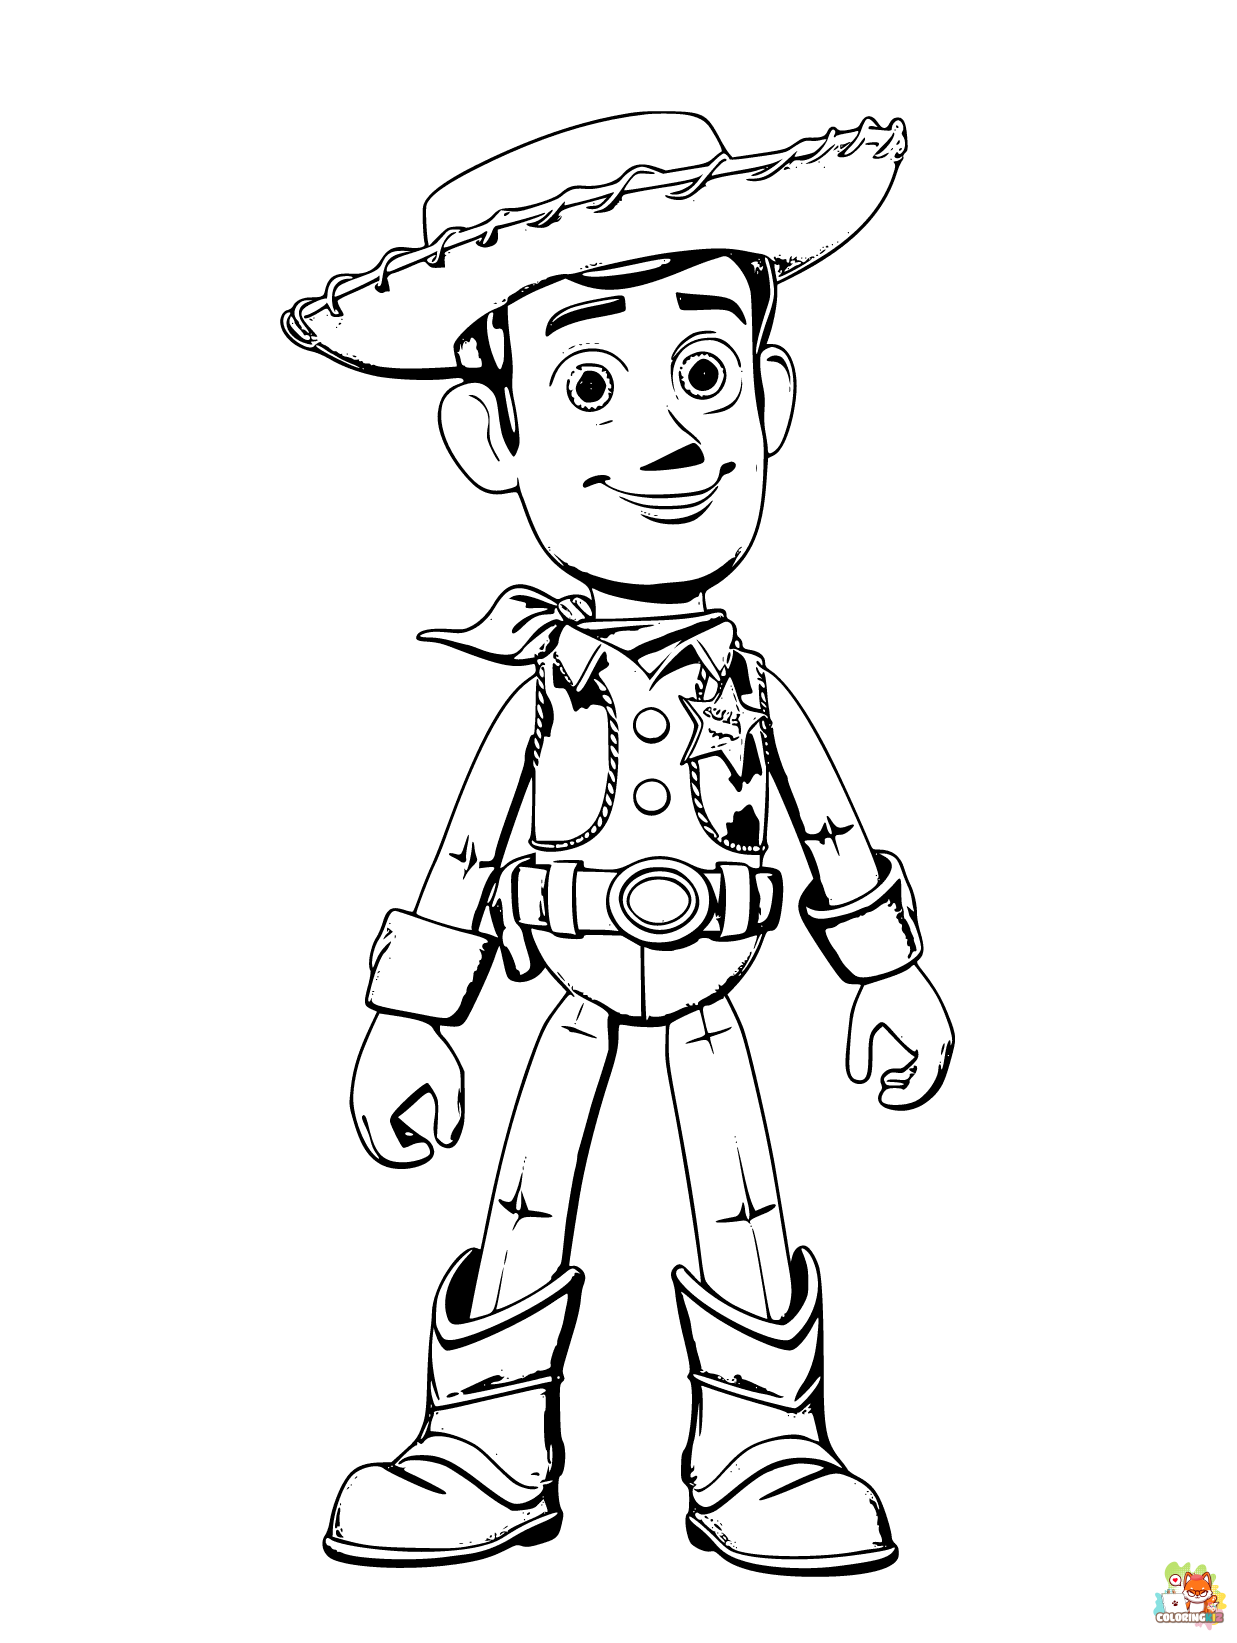 Toy Story coloring pages printable 2